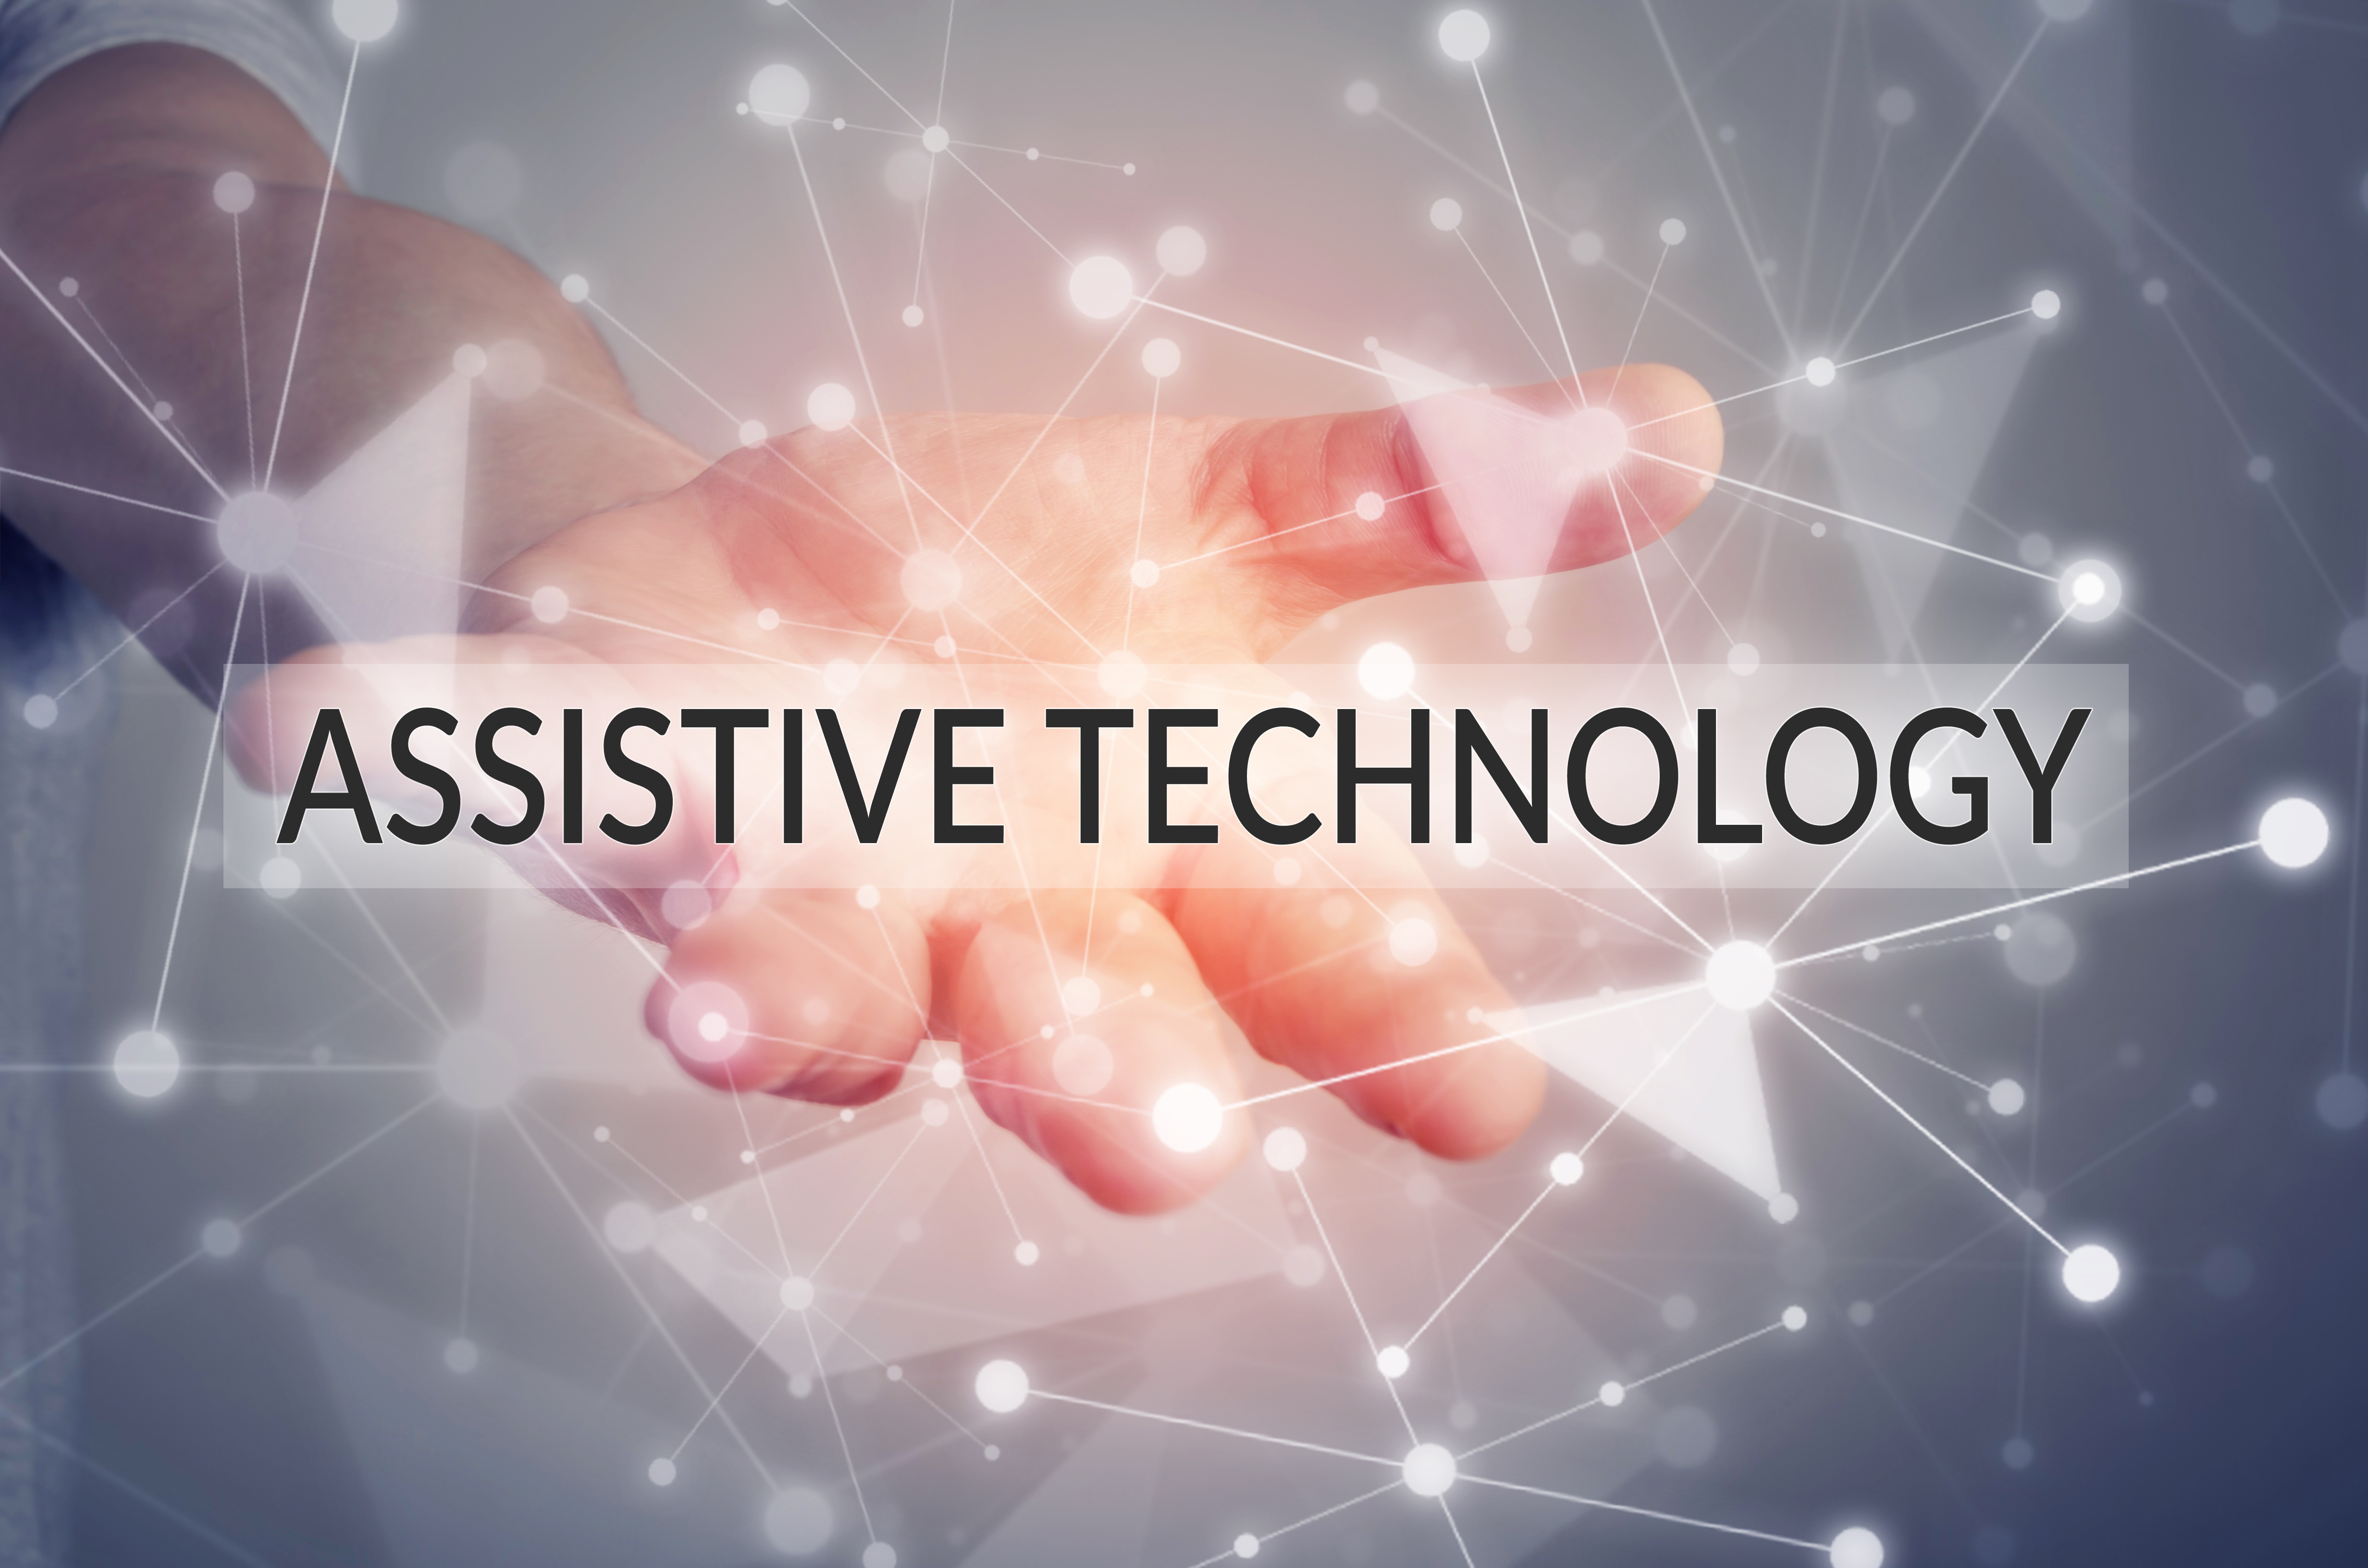 Assistive technology - a hand held out with the words assistive technology